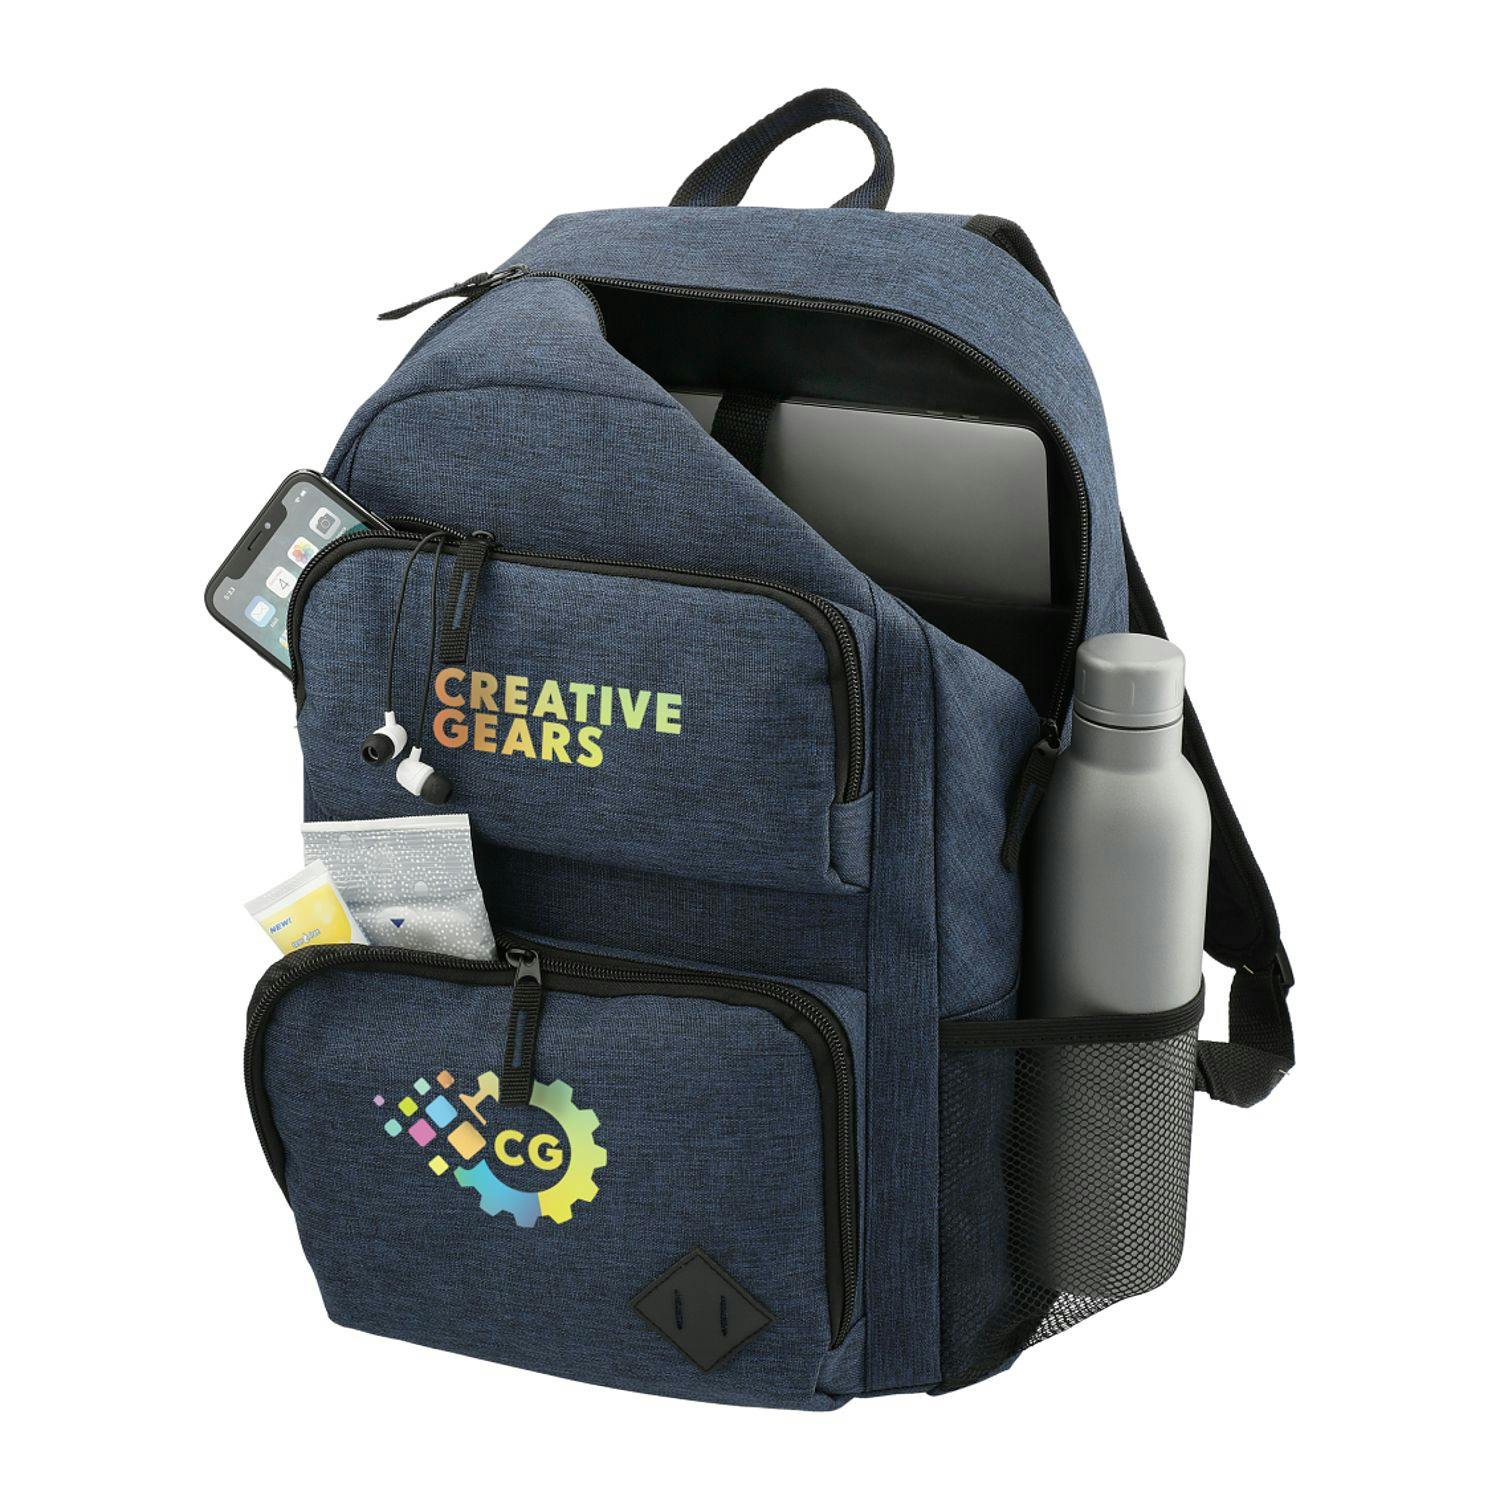 Graphite Deluxe 15" Computer Backpack - additional Image 1